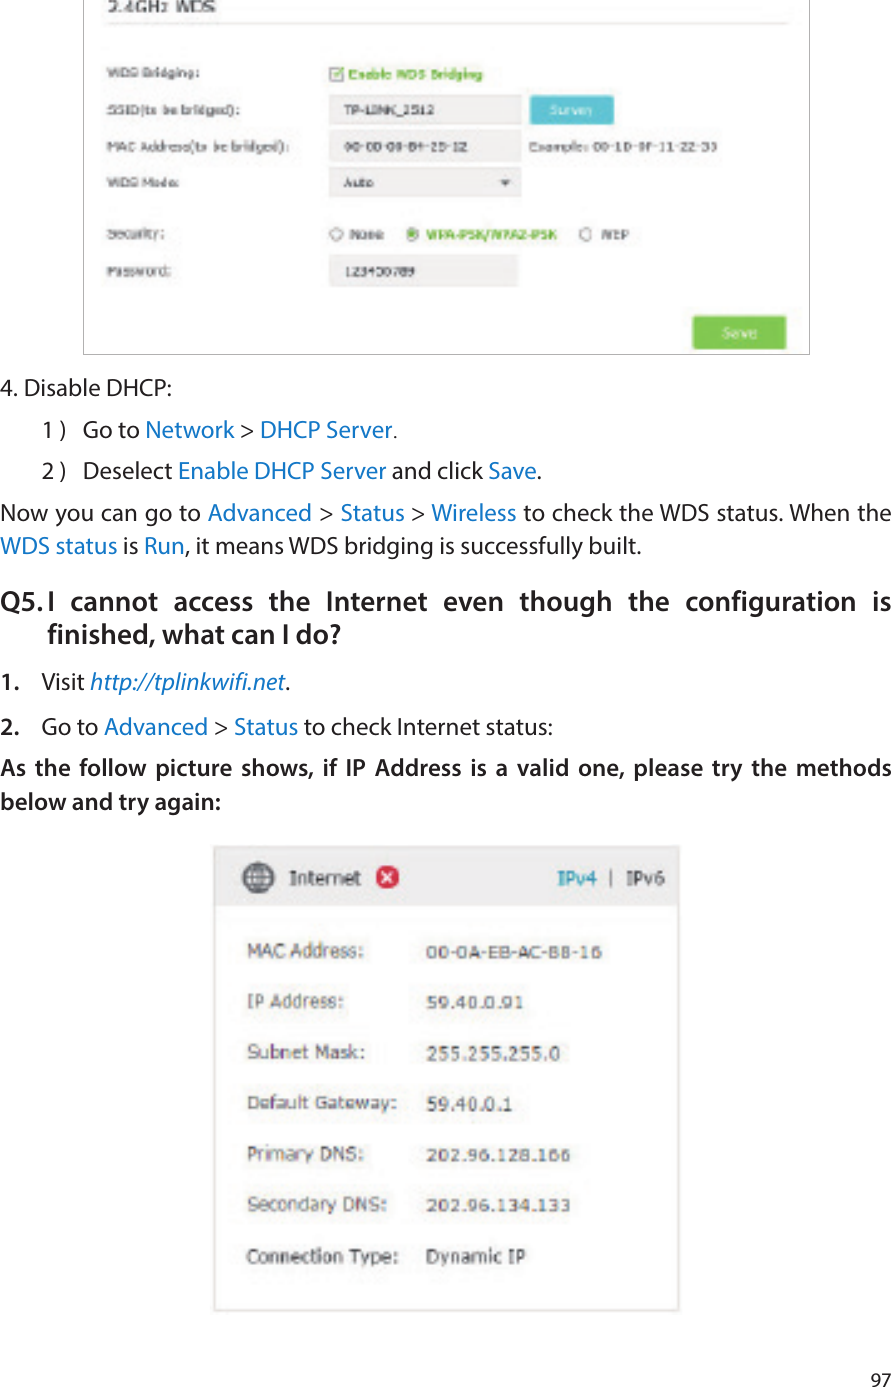 974. Disable DHCP:1 )  Go to Network &gt; DHCP Server.2 )  Deselect Enable DHCP Server and click Save.Now you can go to Advanced &gt; Status &gt; Wireless to check the WDS status. When the WDS status is Run, it means WDS bridging is successfully built.Q5. I cannot access the Internet even though the configuration is finished, what can I do?1.  Visit http://tplinkwifi.net.2.  Go to Advanced &gt; Status to check Internet status:As the follow picture shows, if IP Address is a valid one, please try the methods below and try again: